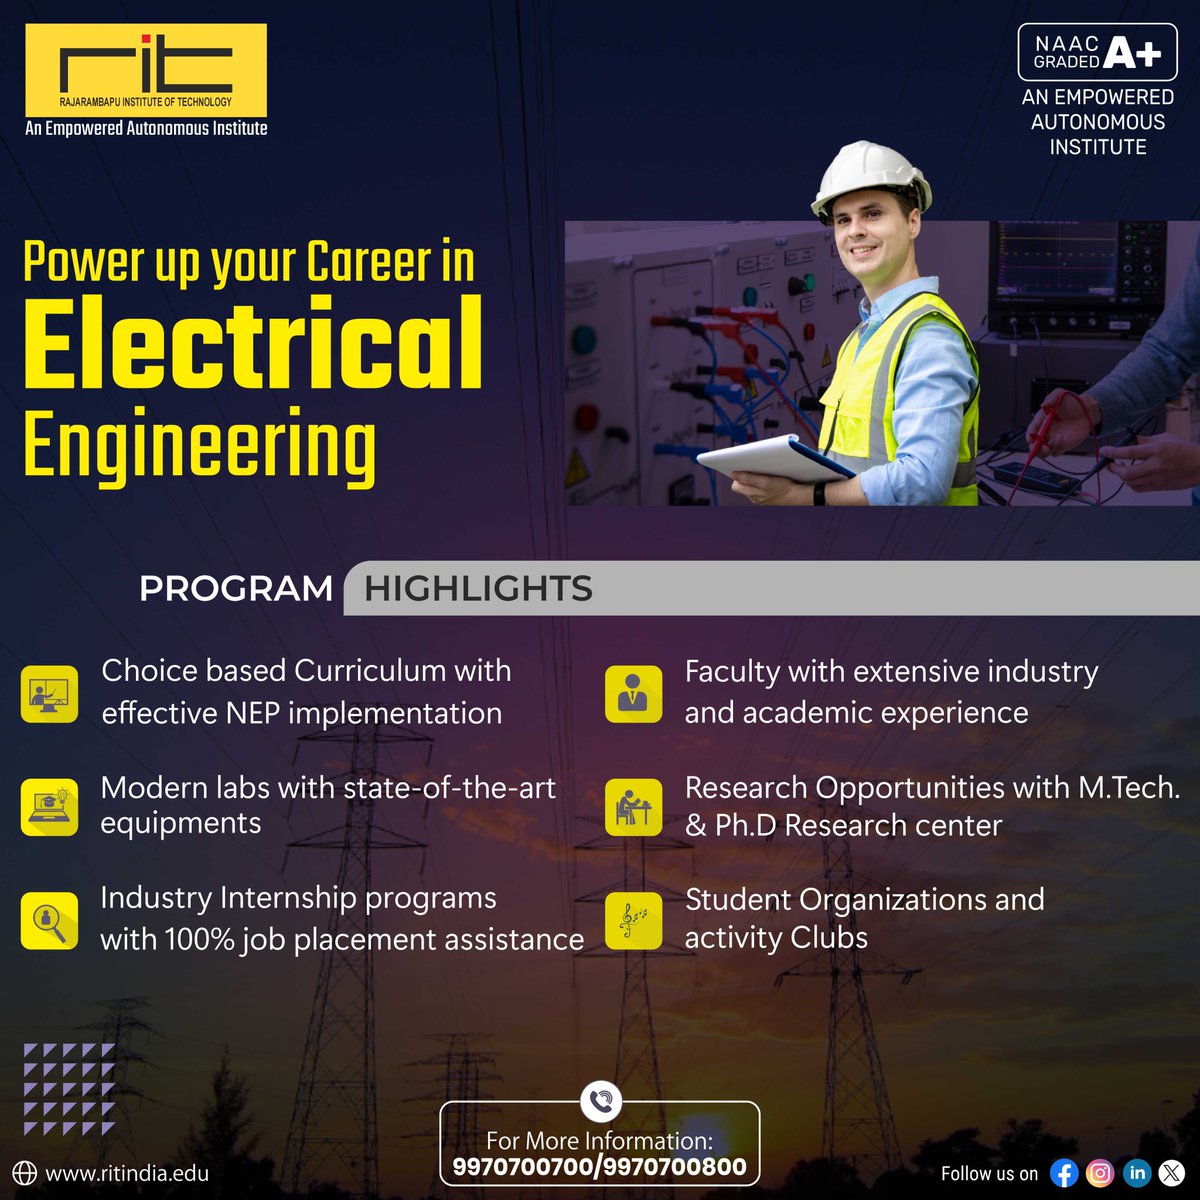 Power up your future with our Electrical Engineering program! From renewable energy to smart grid technology, join us in shaping a sustainable tomorrow. Apply now and spark your passion for innovation! ⚡️🔌

#EngineeringAdmissions #ElectricalEngineering #PoweringTheFuture